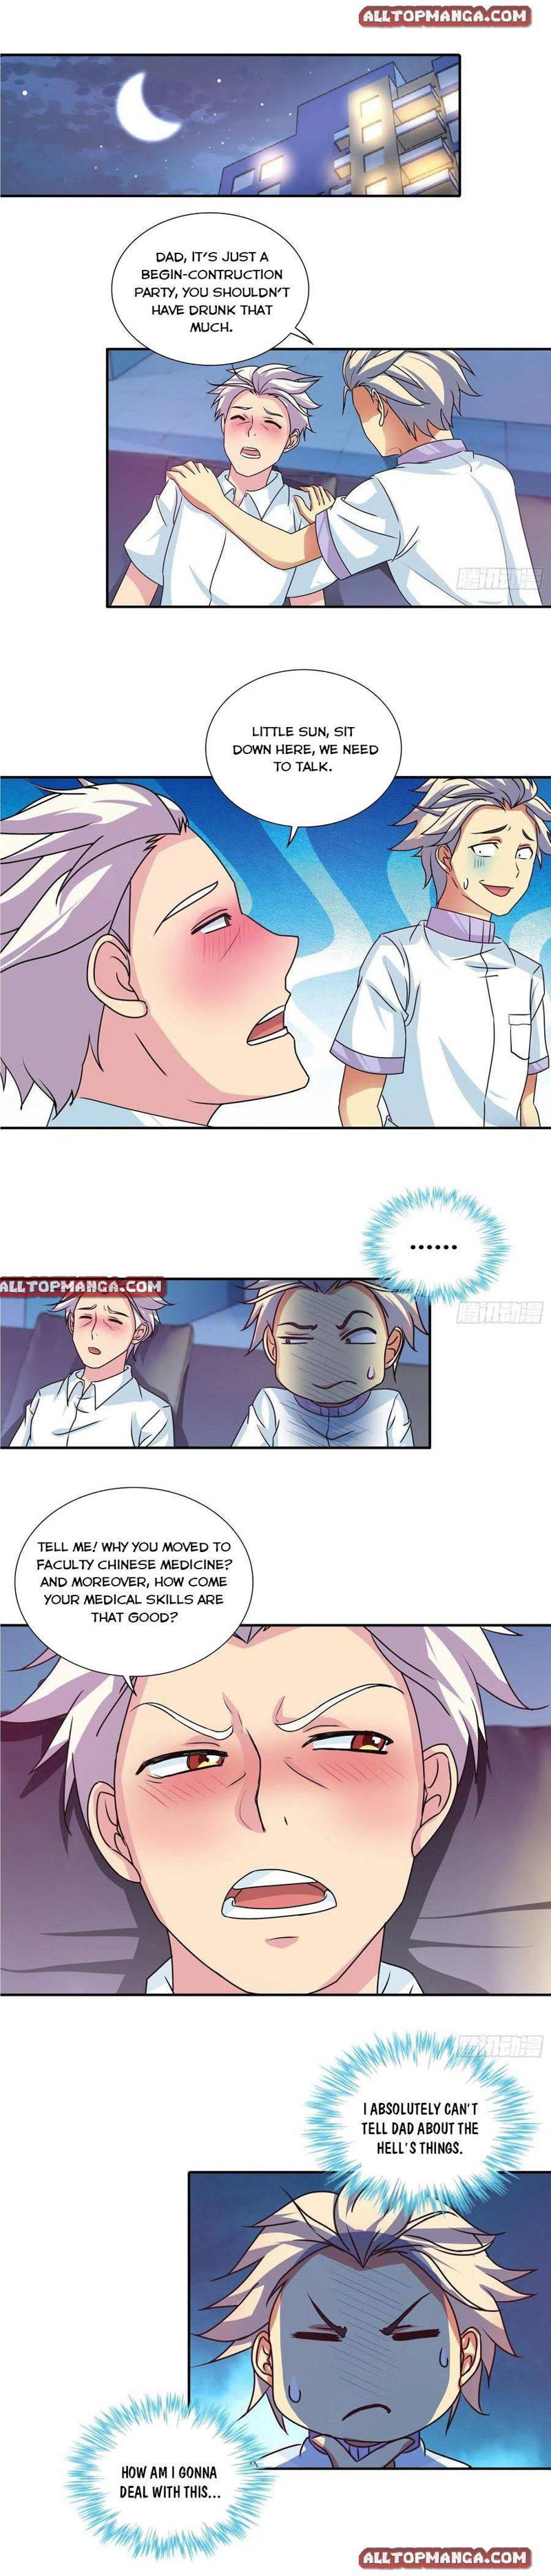 I Am A God Of Medicine Chapter 109 page 1